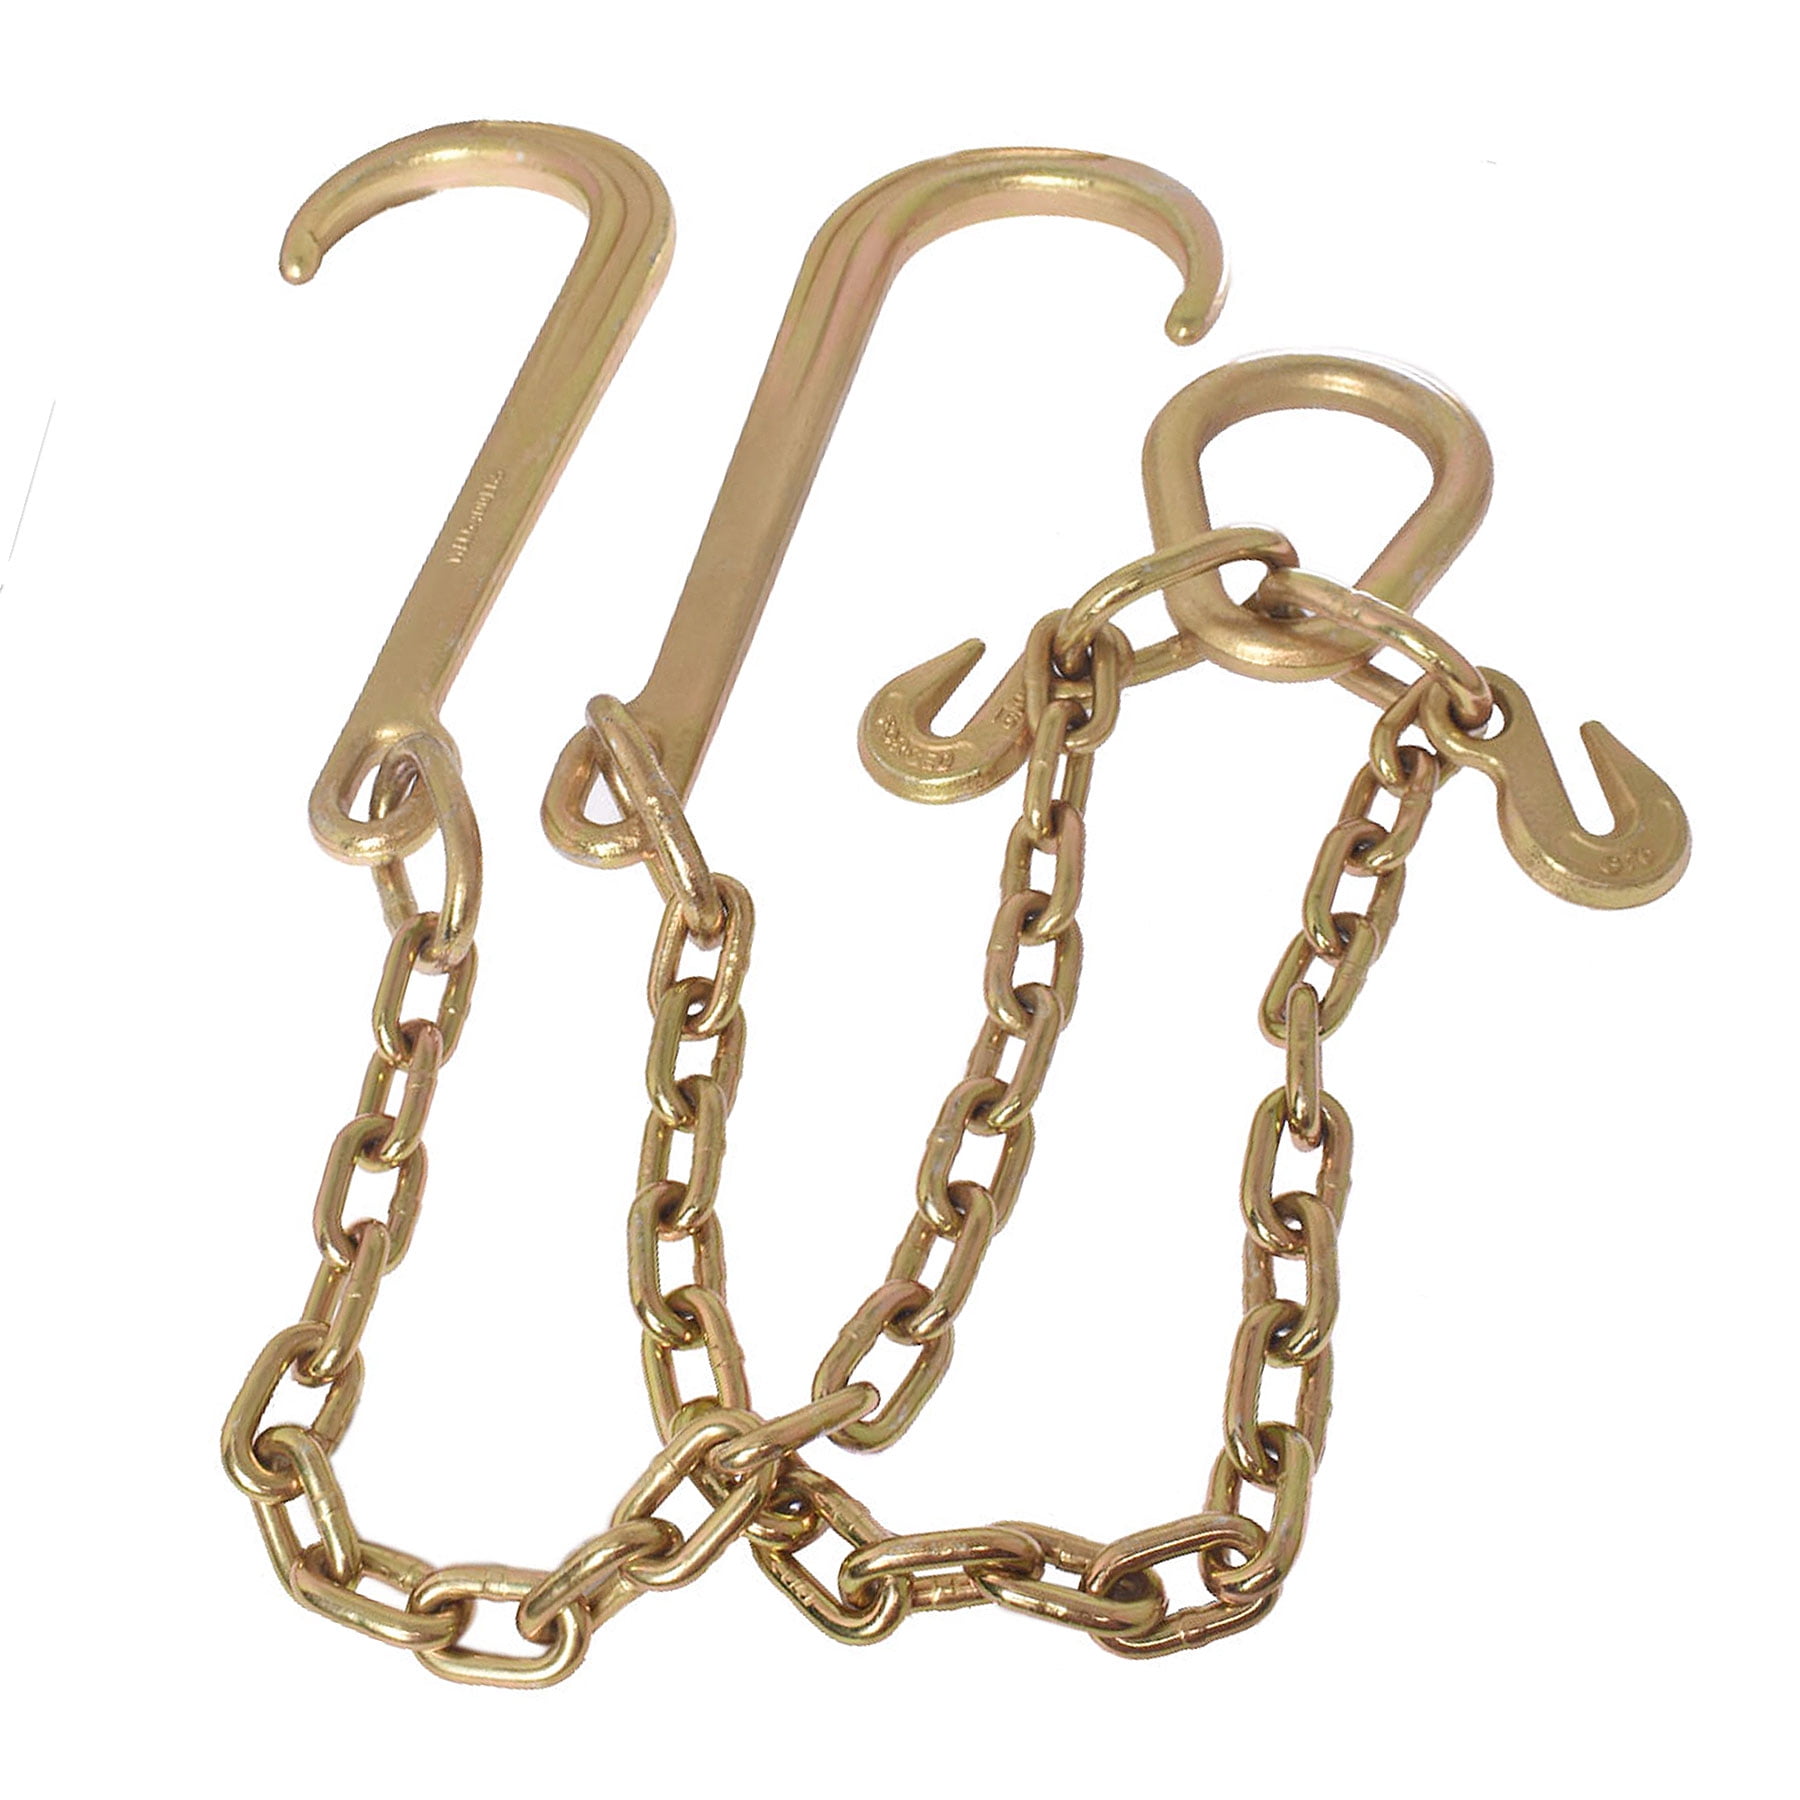 VULCAN Tow Chain with 8 Inch Forged J Hook and Grab Hook - Grade 70 - 6 Foot  - PROSeries - 4,700 Pound Safe Working Load 